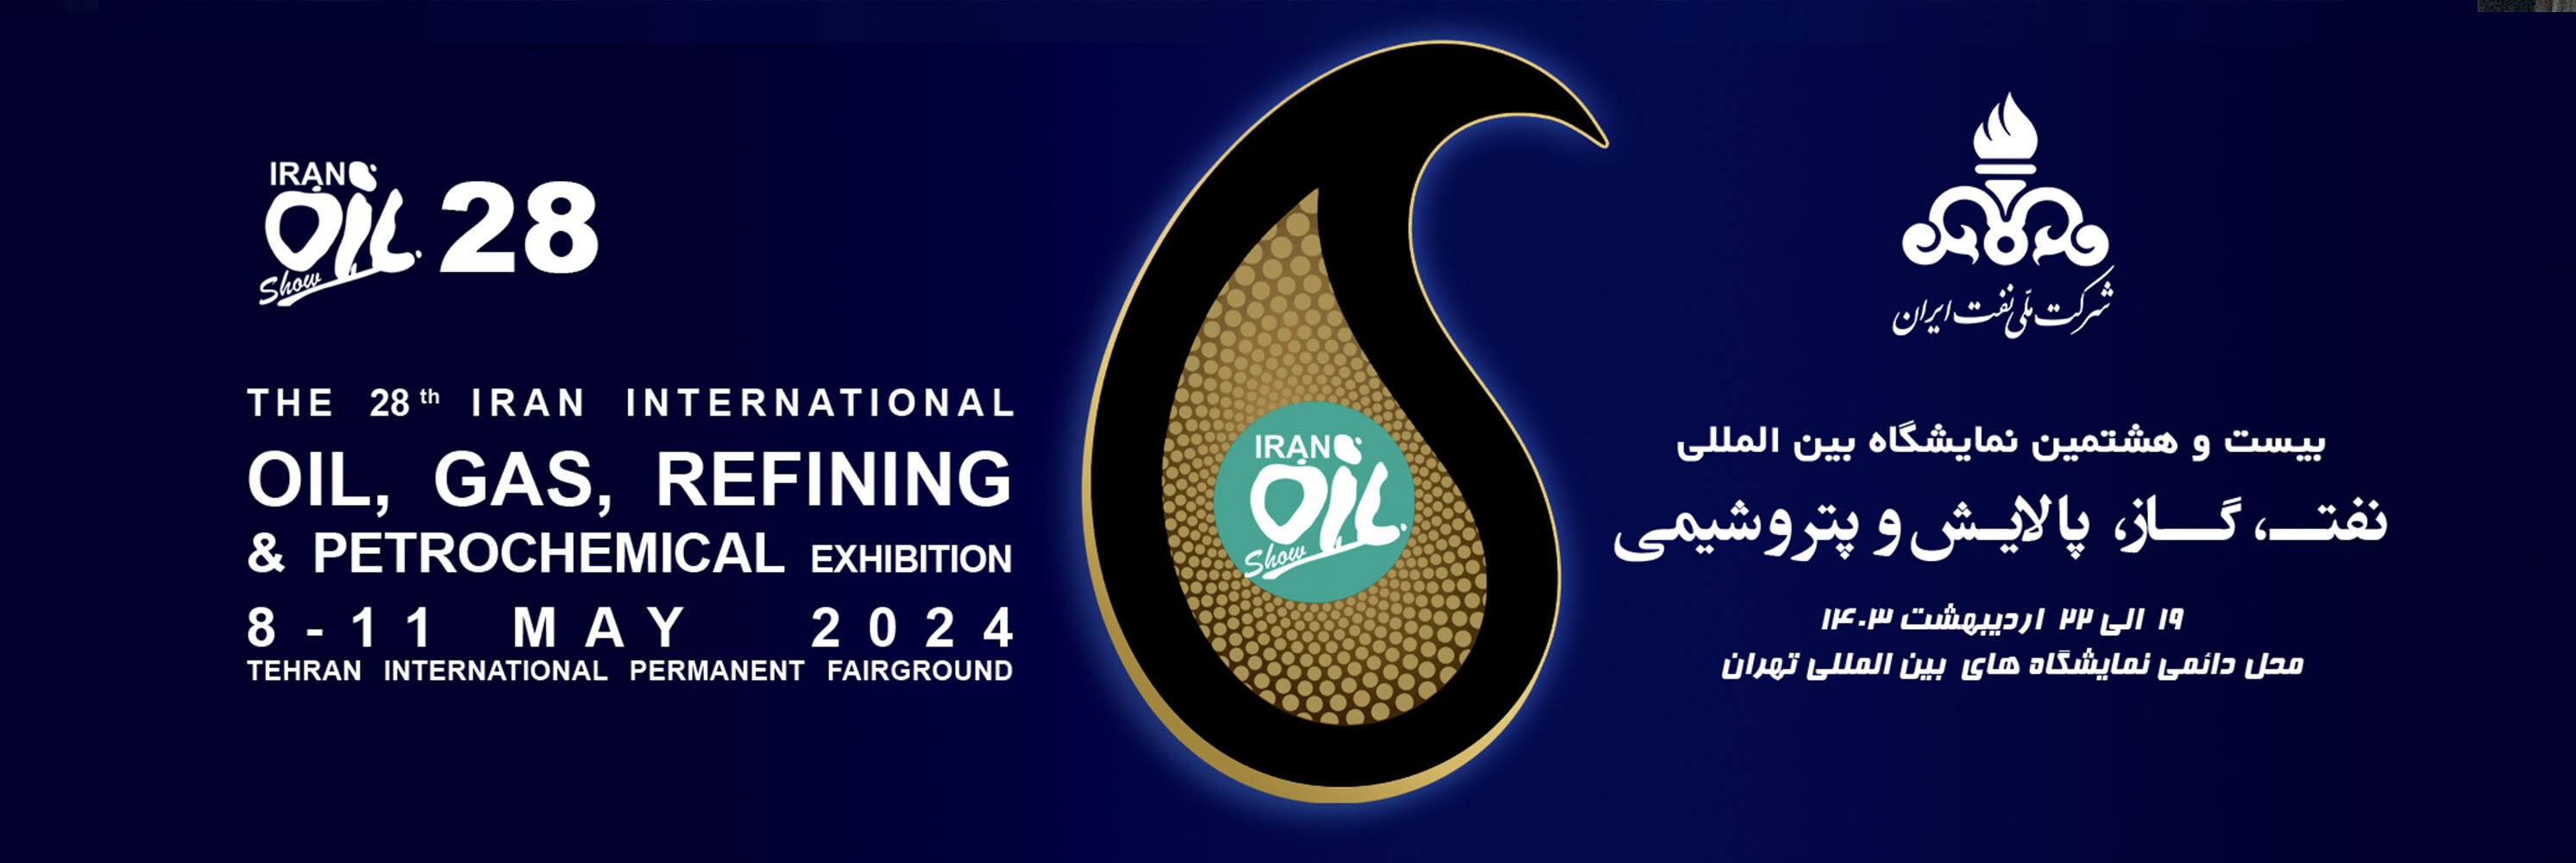 Waiting for you at the 2024 Iran Oil Show!